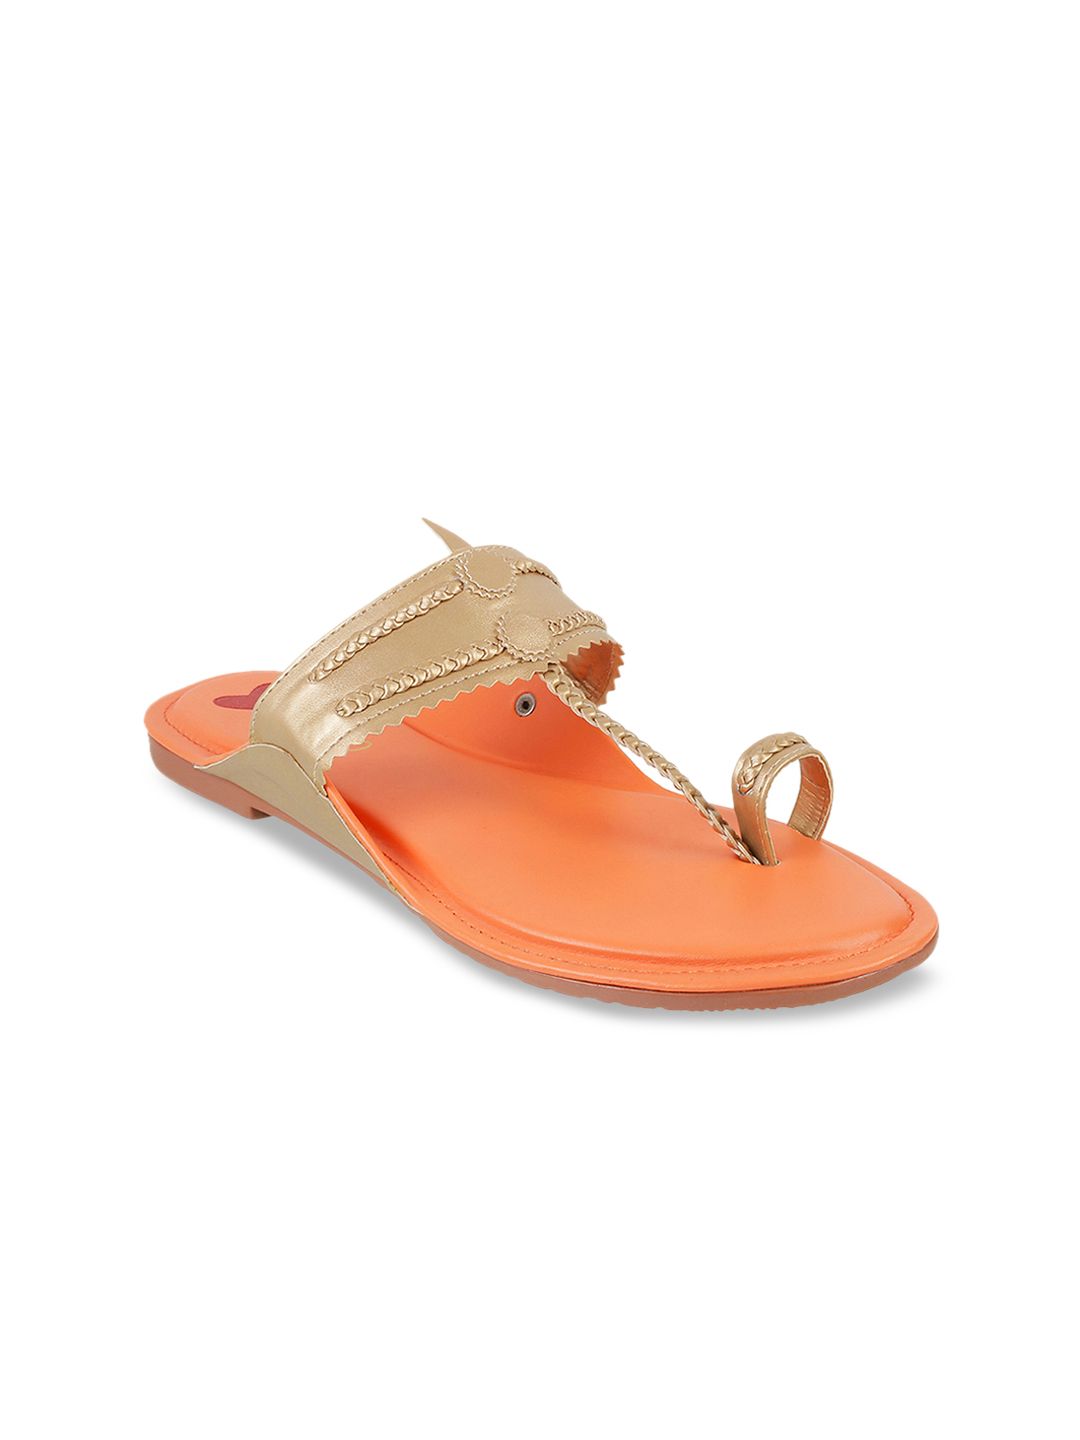 Metro Women Gold-Toned Textured T-Strap Flats Price in India